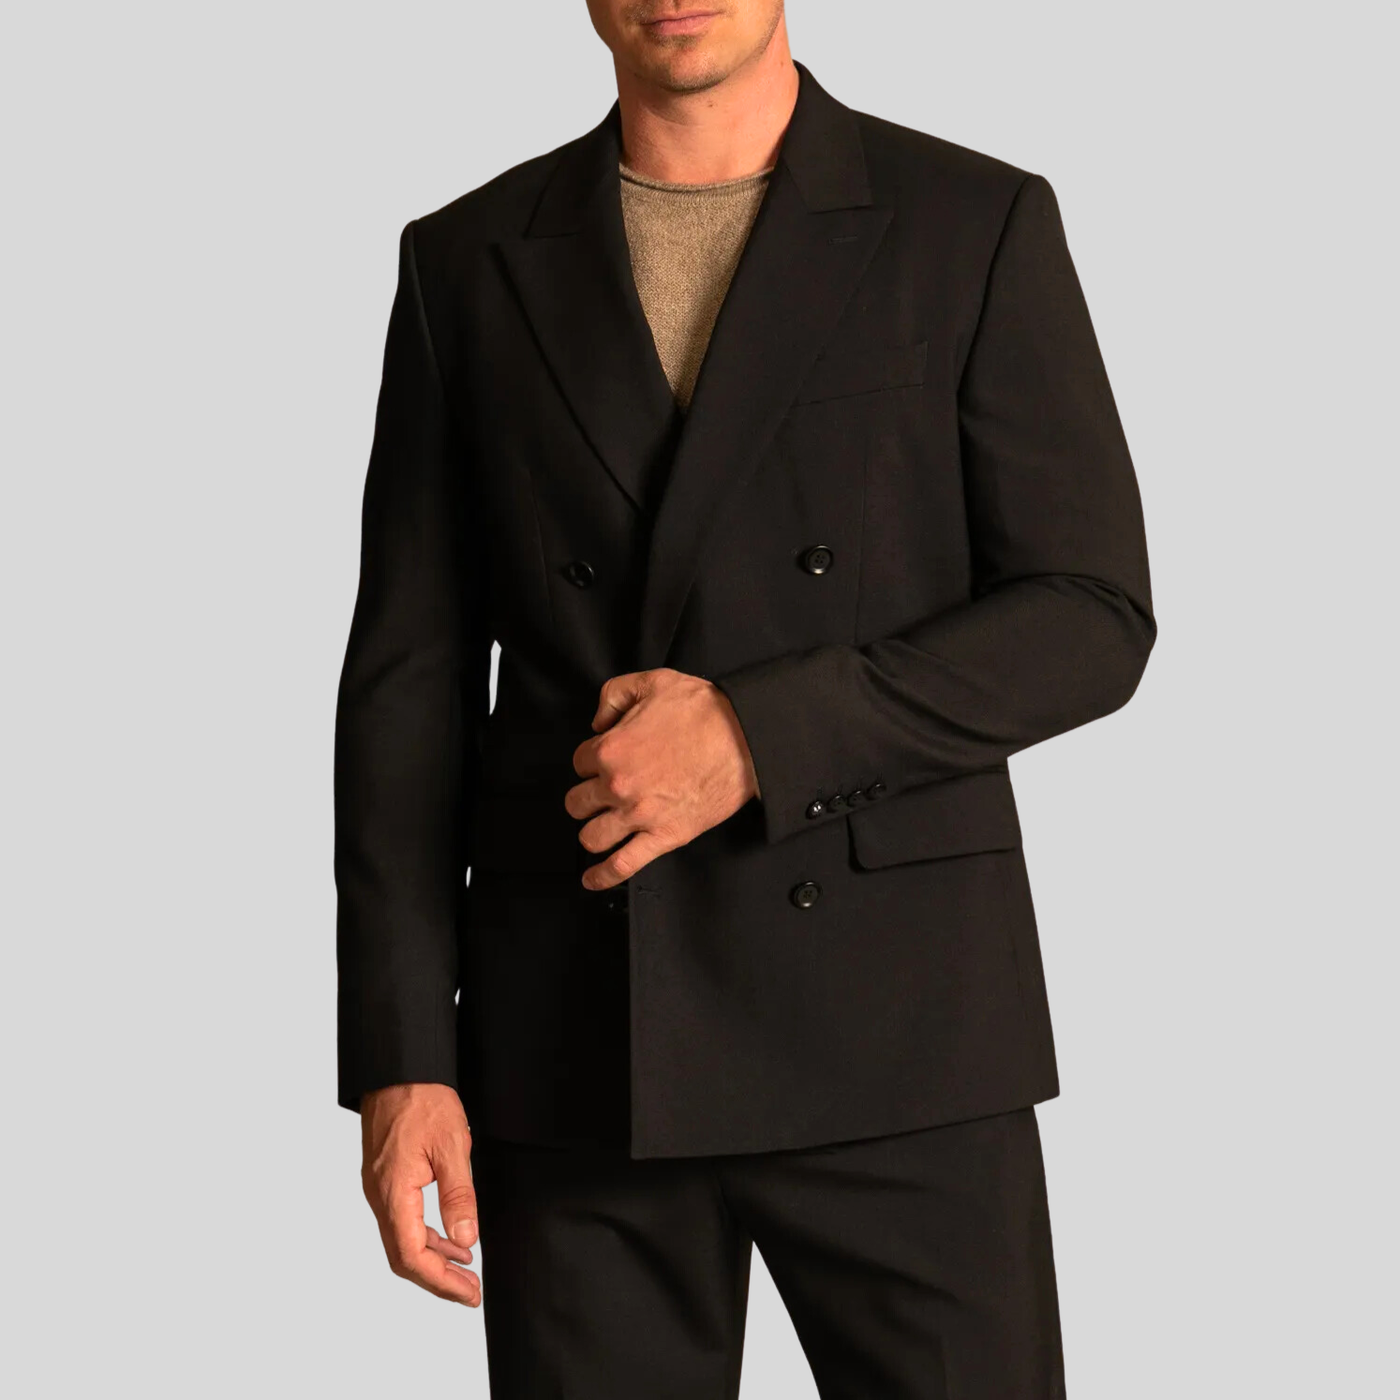 Gotstyle Fashion - Strellson Suits Double Breasted Slim Fit Wool Blazer - Black